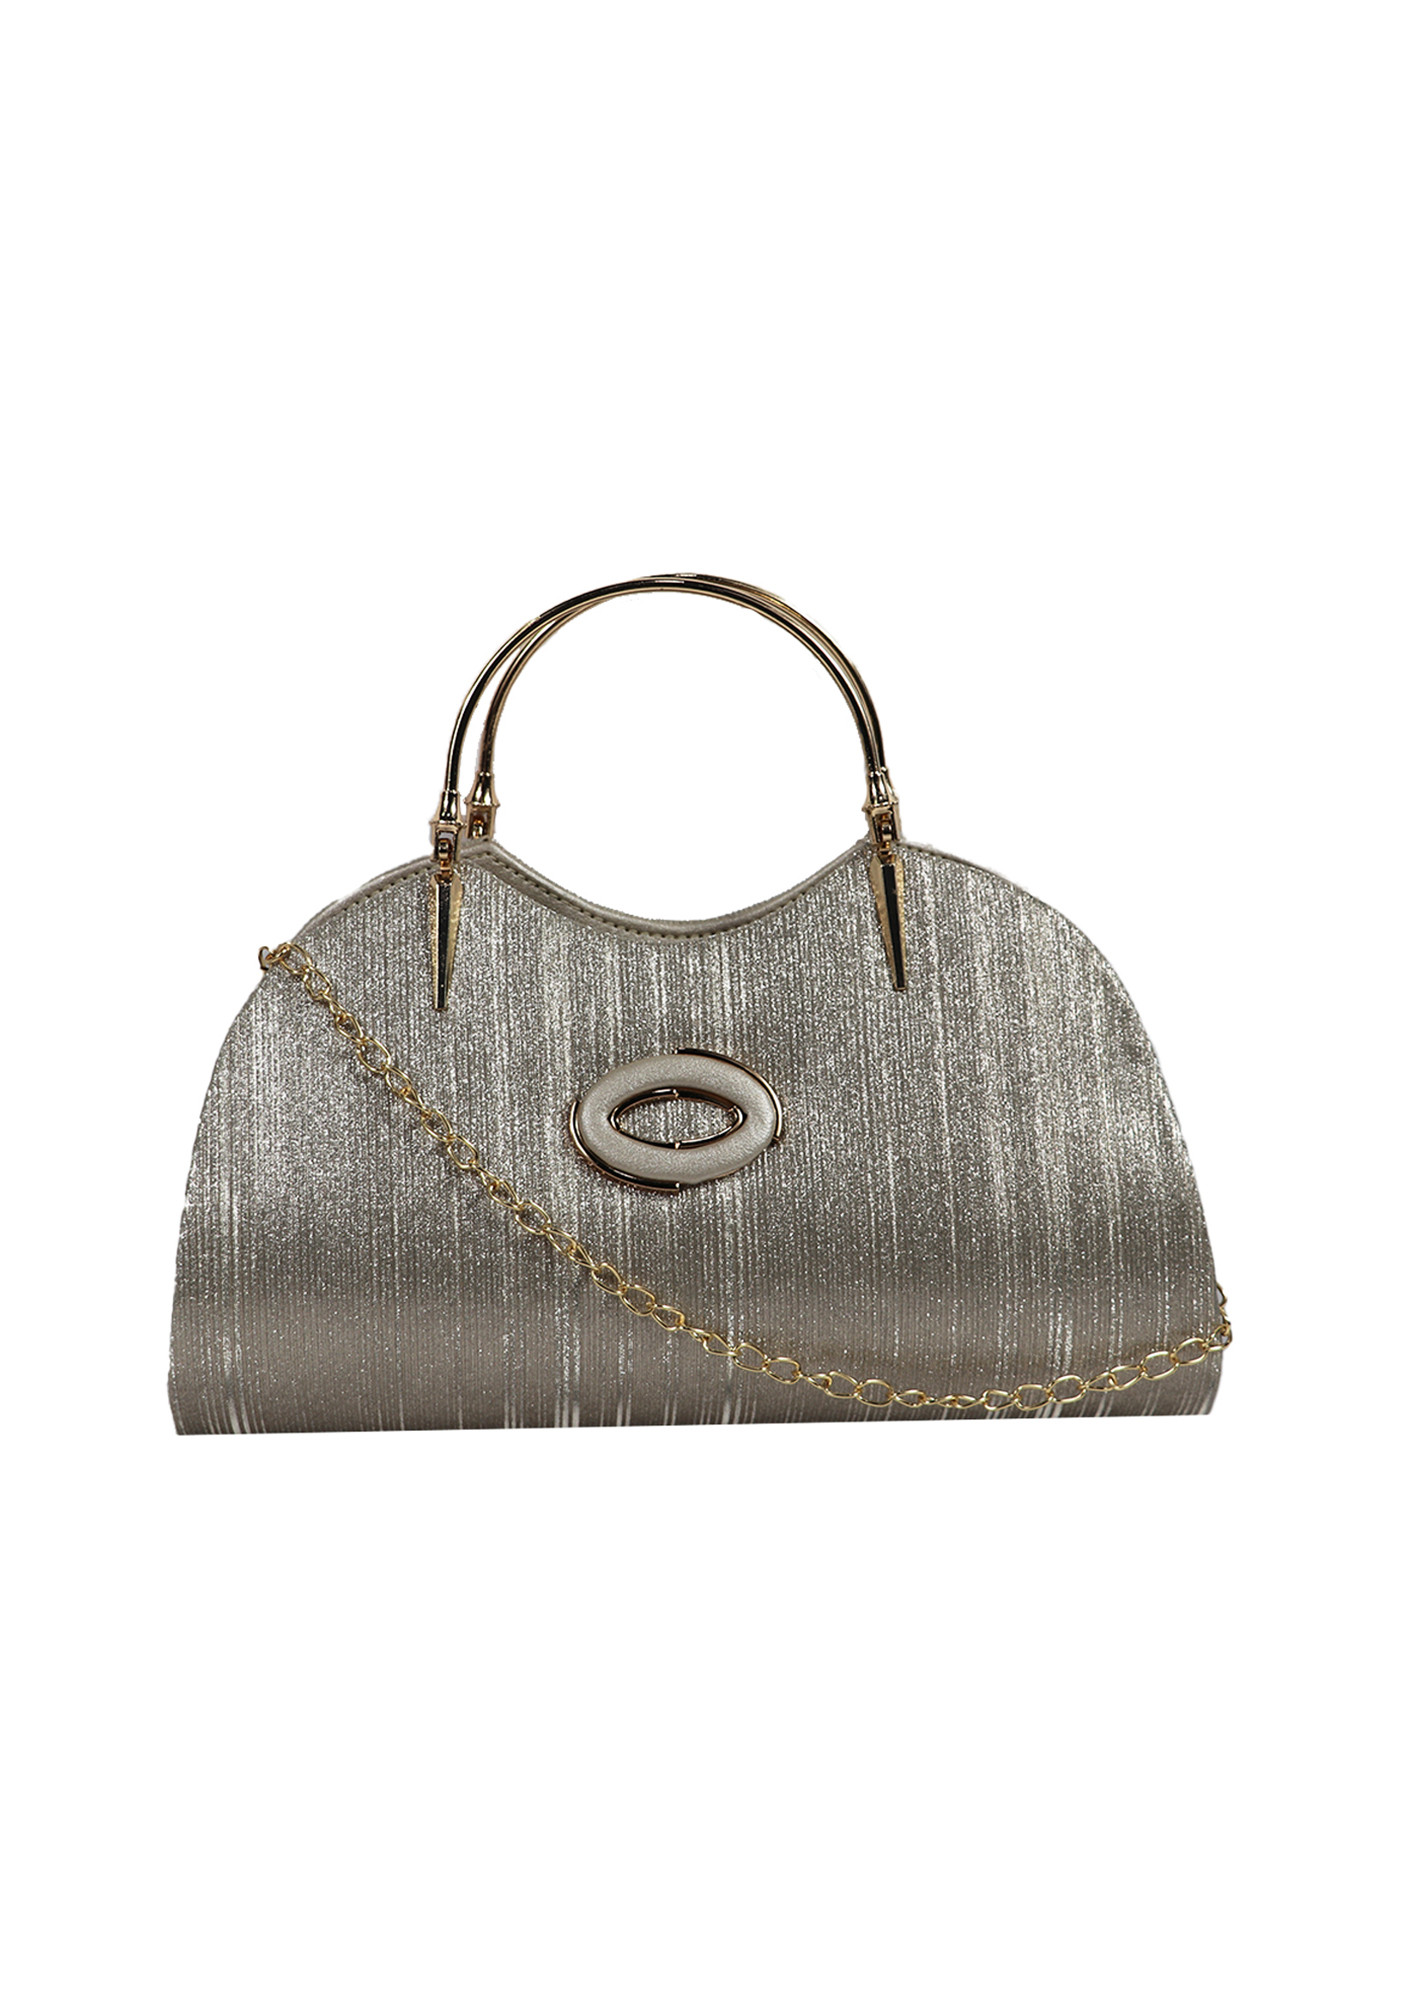 Silver Structured Handheld Bag For Party With Chain